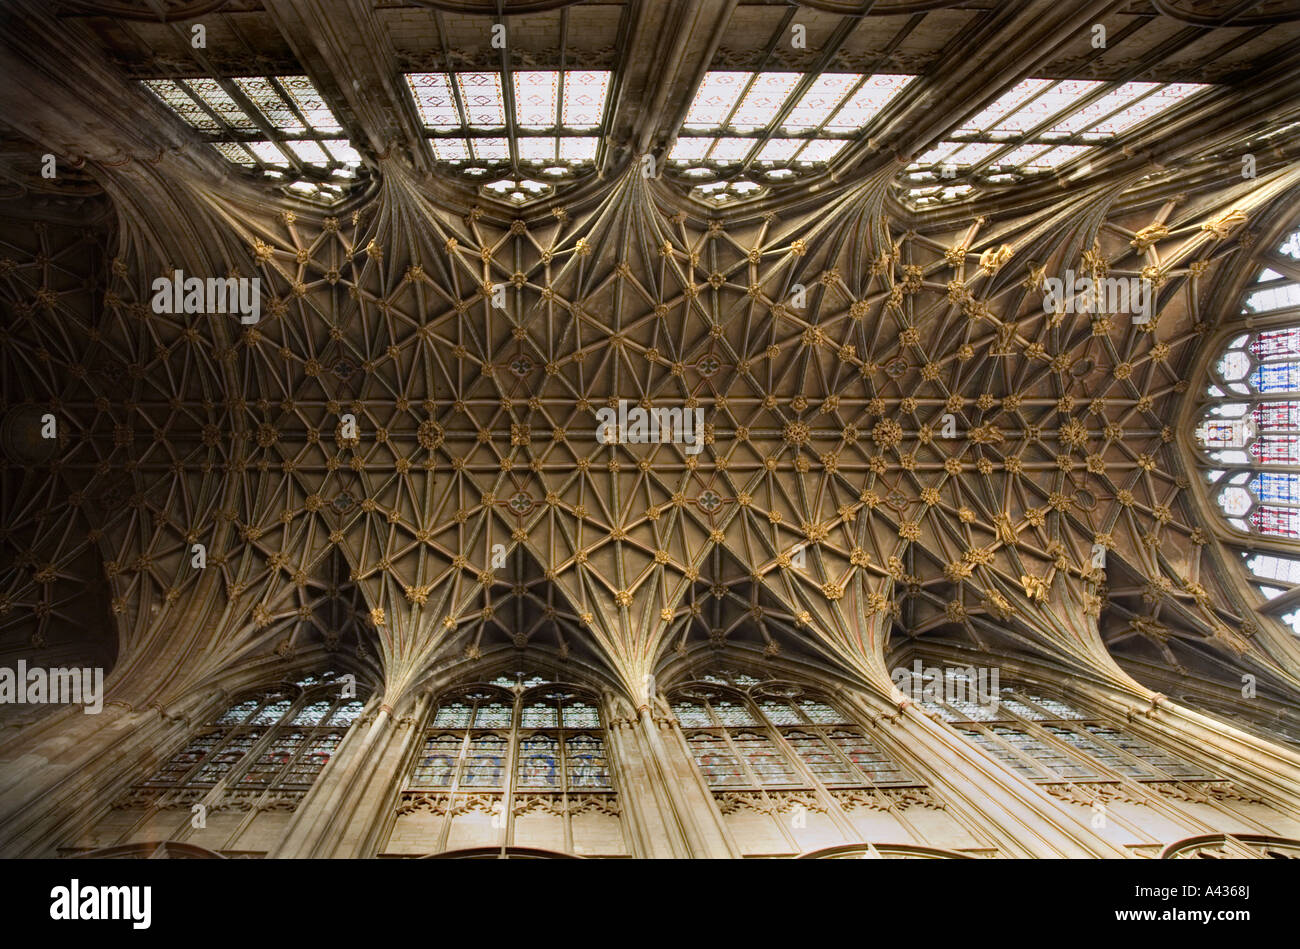 Lierne vaulting of Gloucester Cathedral choir vault / South transept ceiling Gloucestershire UK Stock Photo